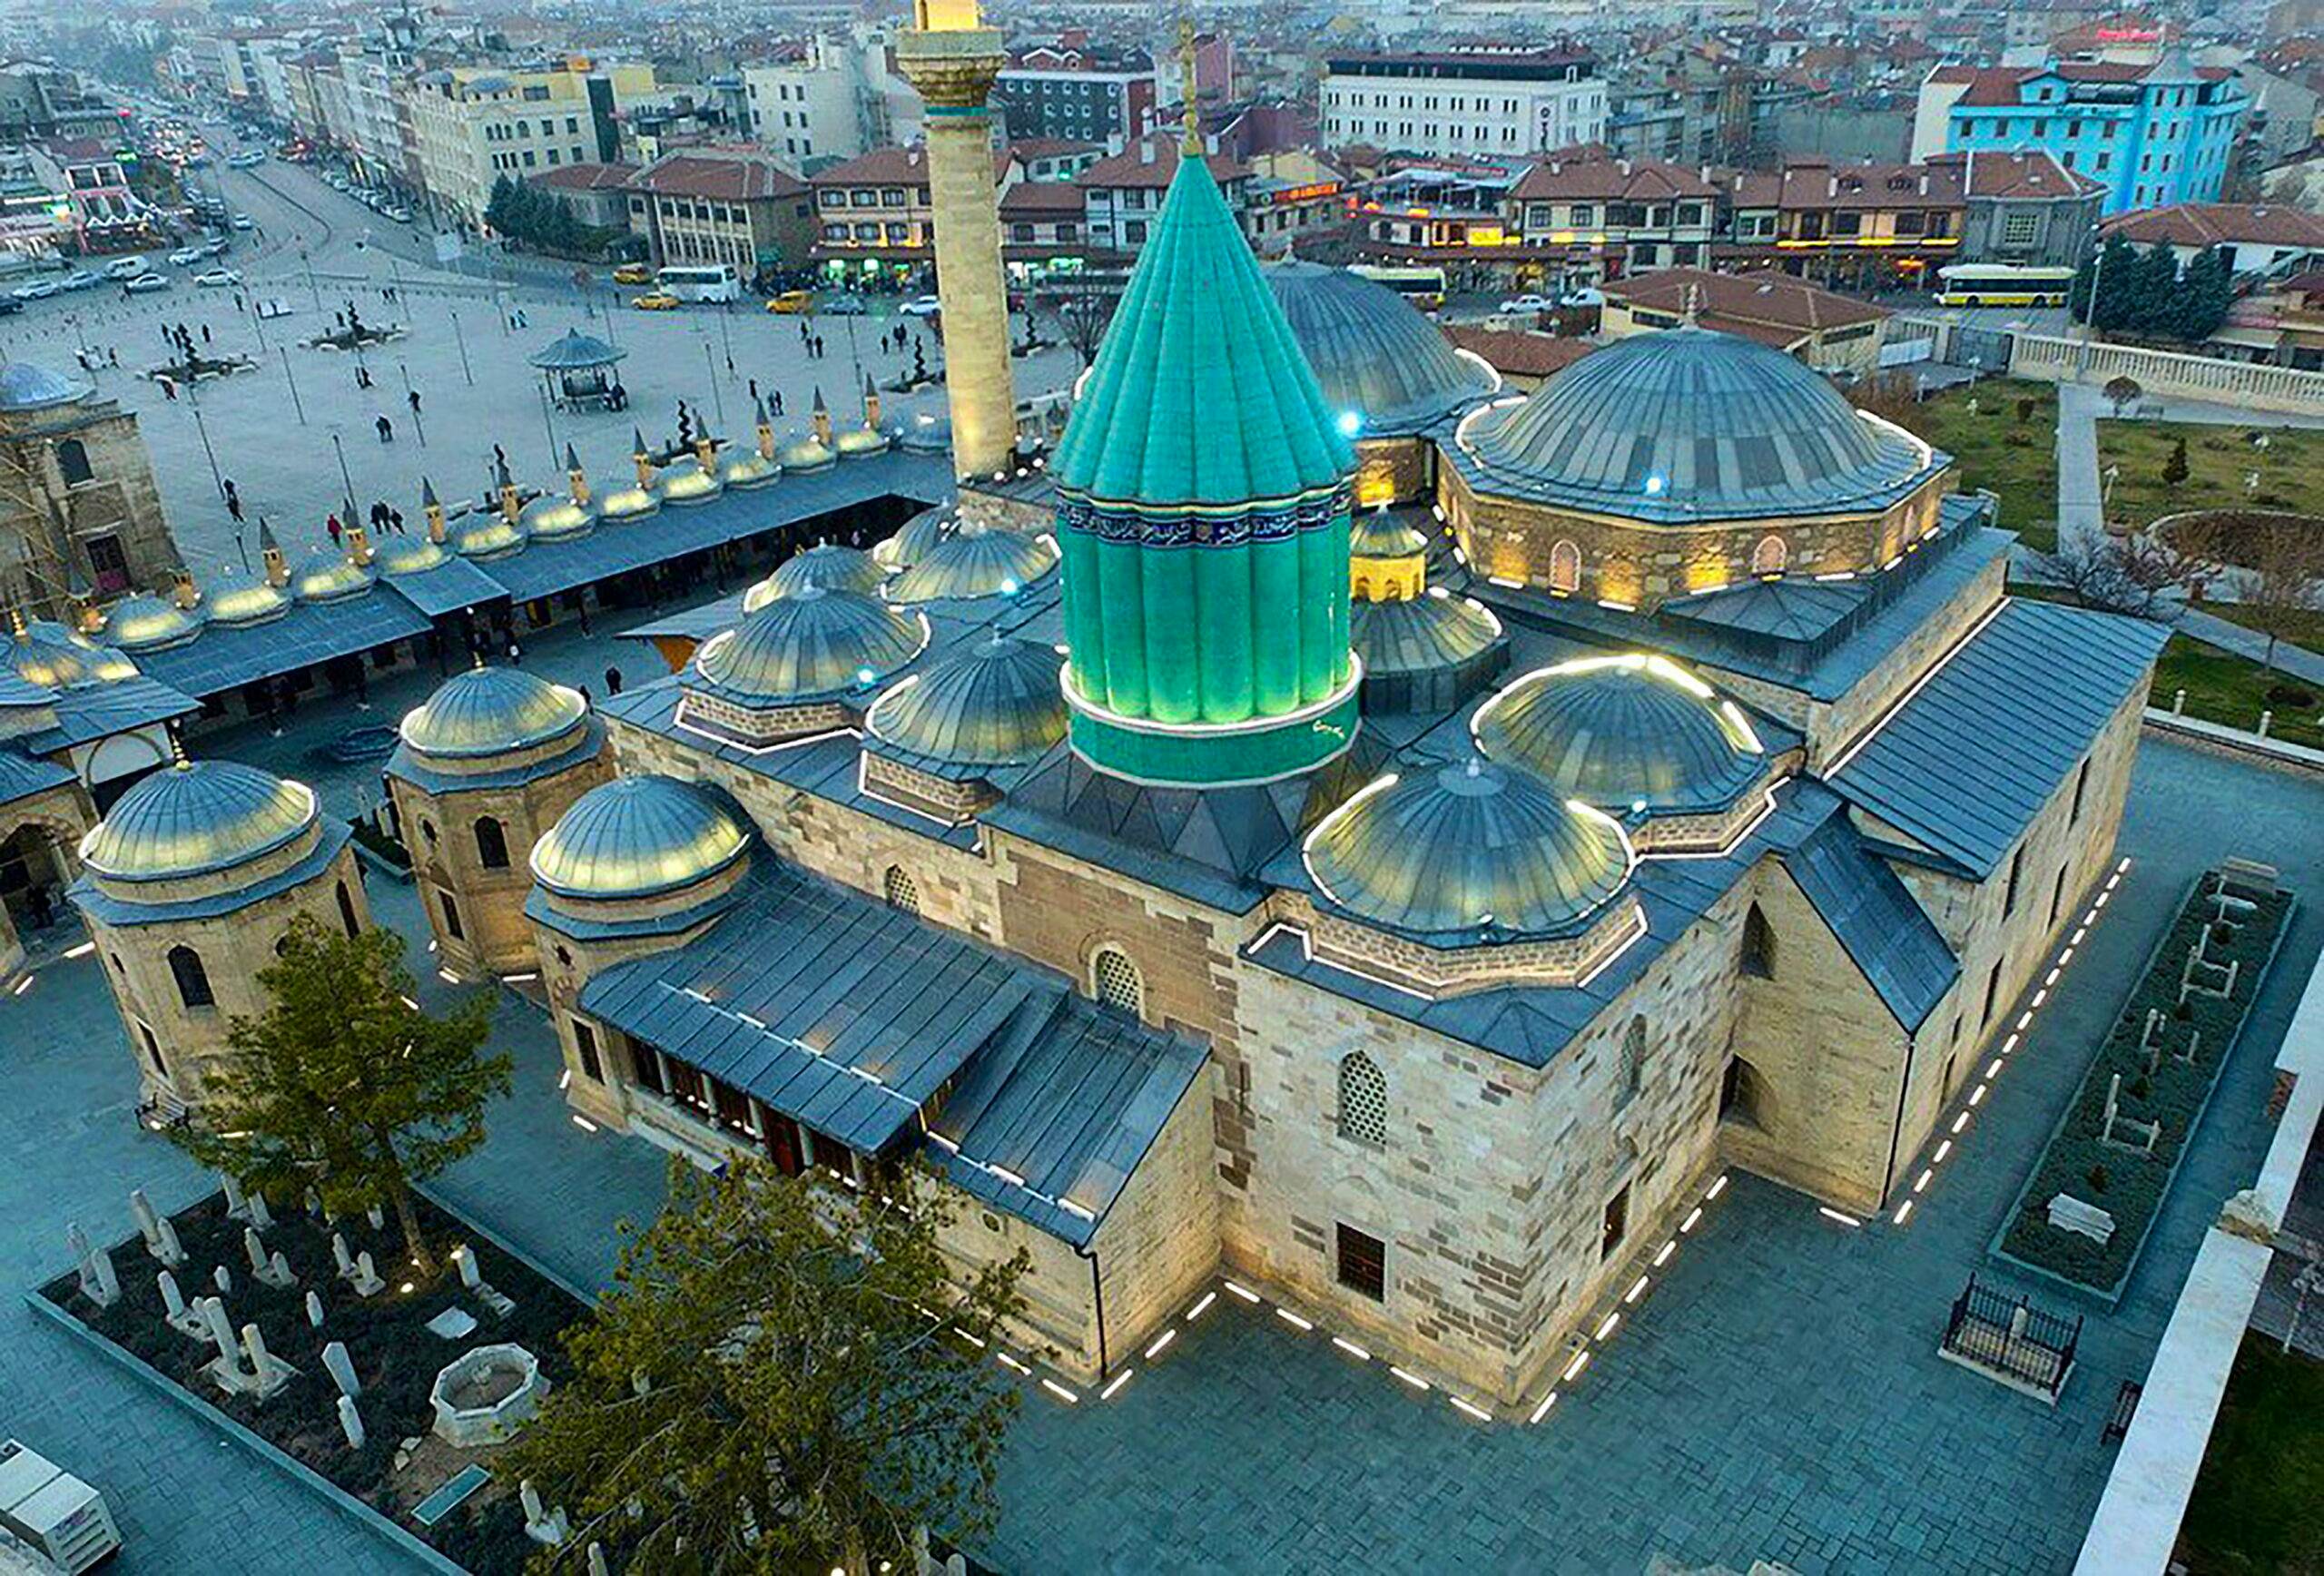 Full Day Konya Mevlana Museum Tour from Cappadocia (after tour continue to Pamukkale) with Private Transfer